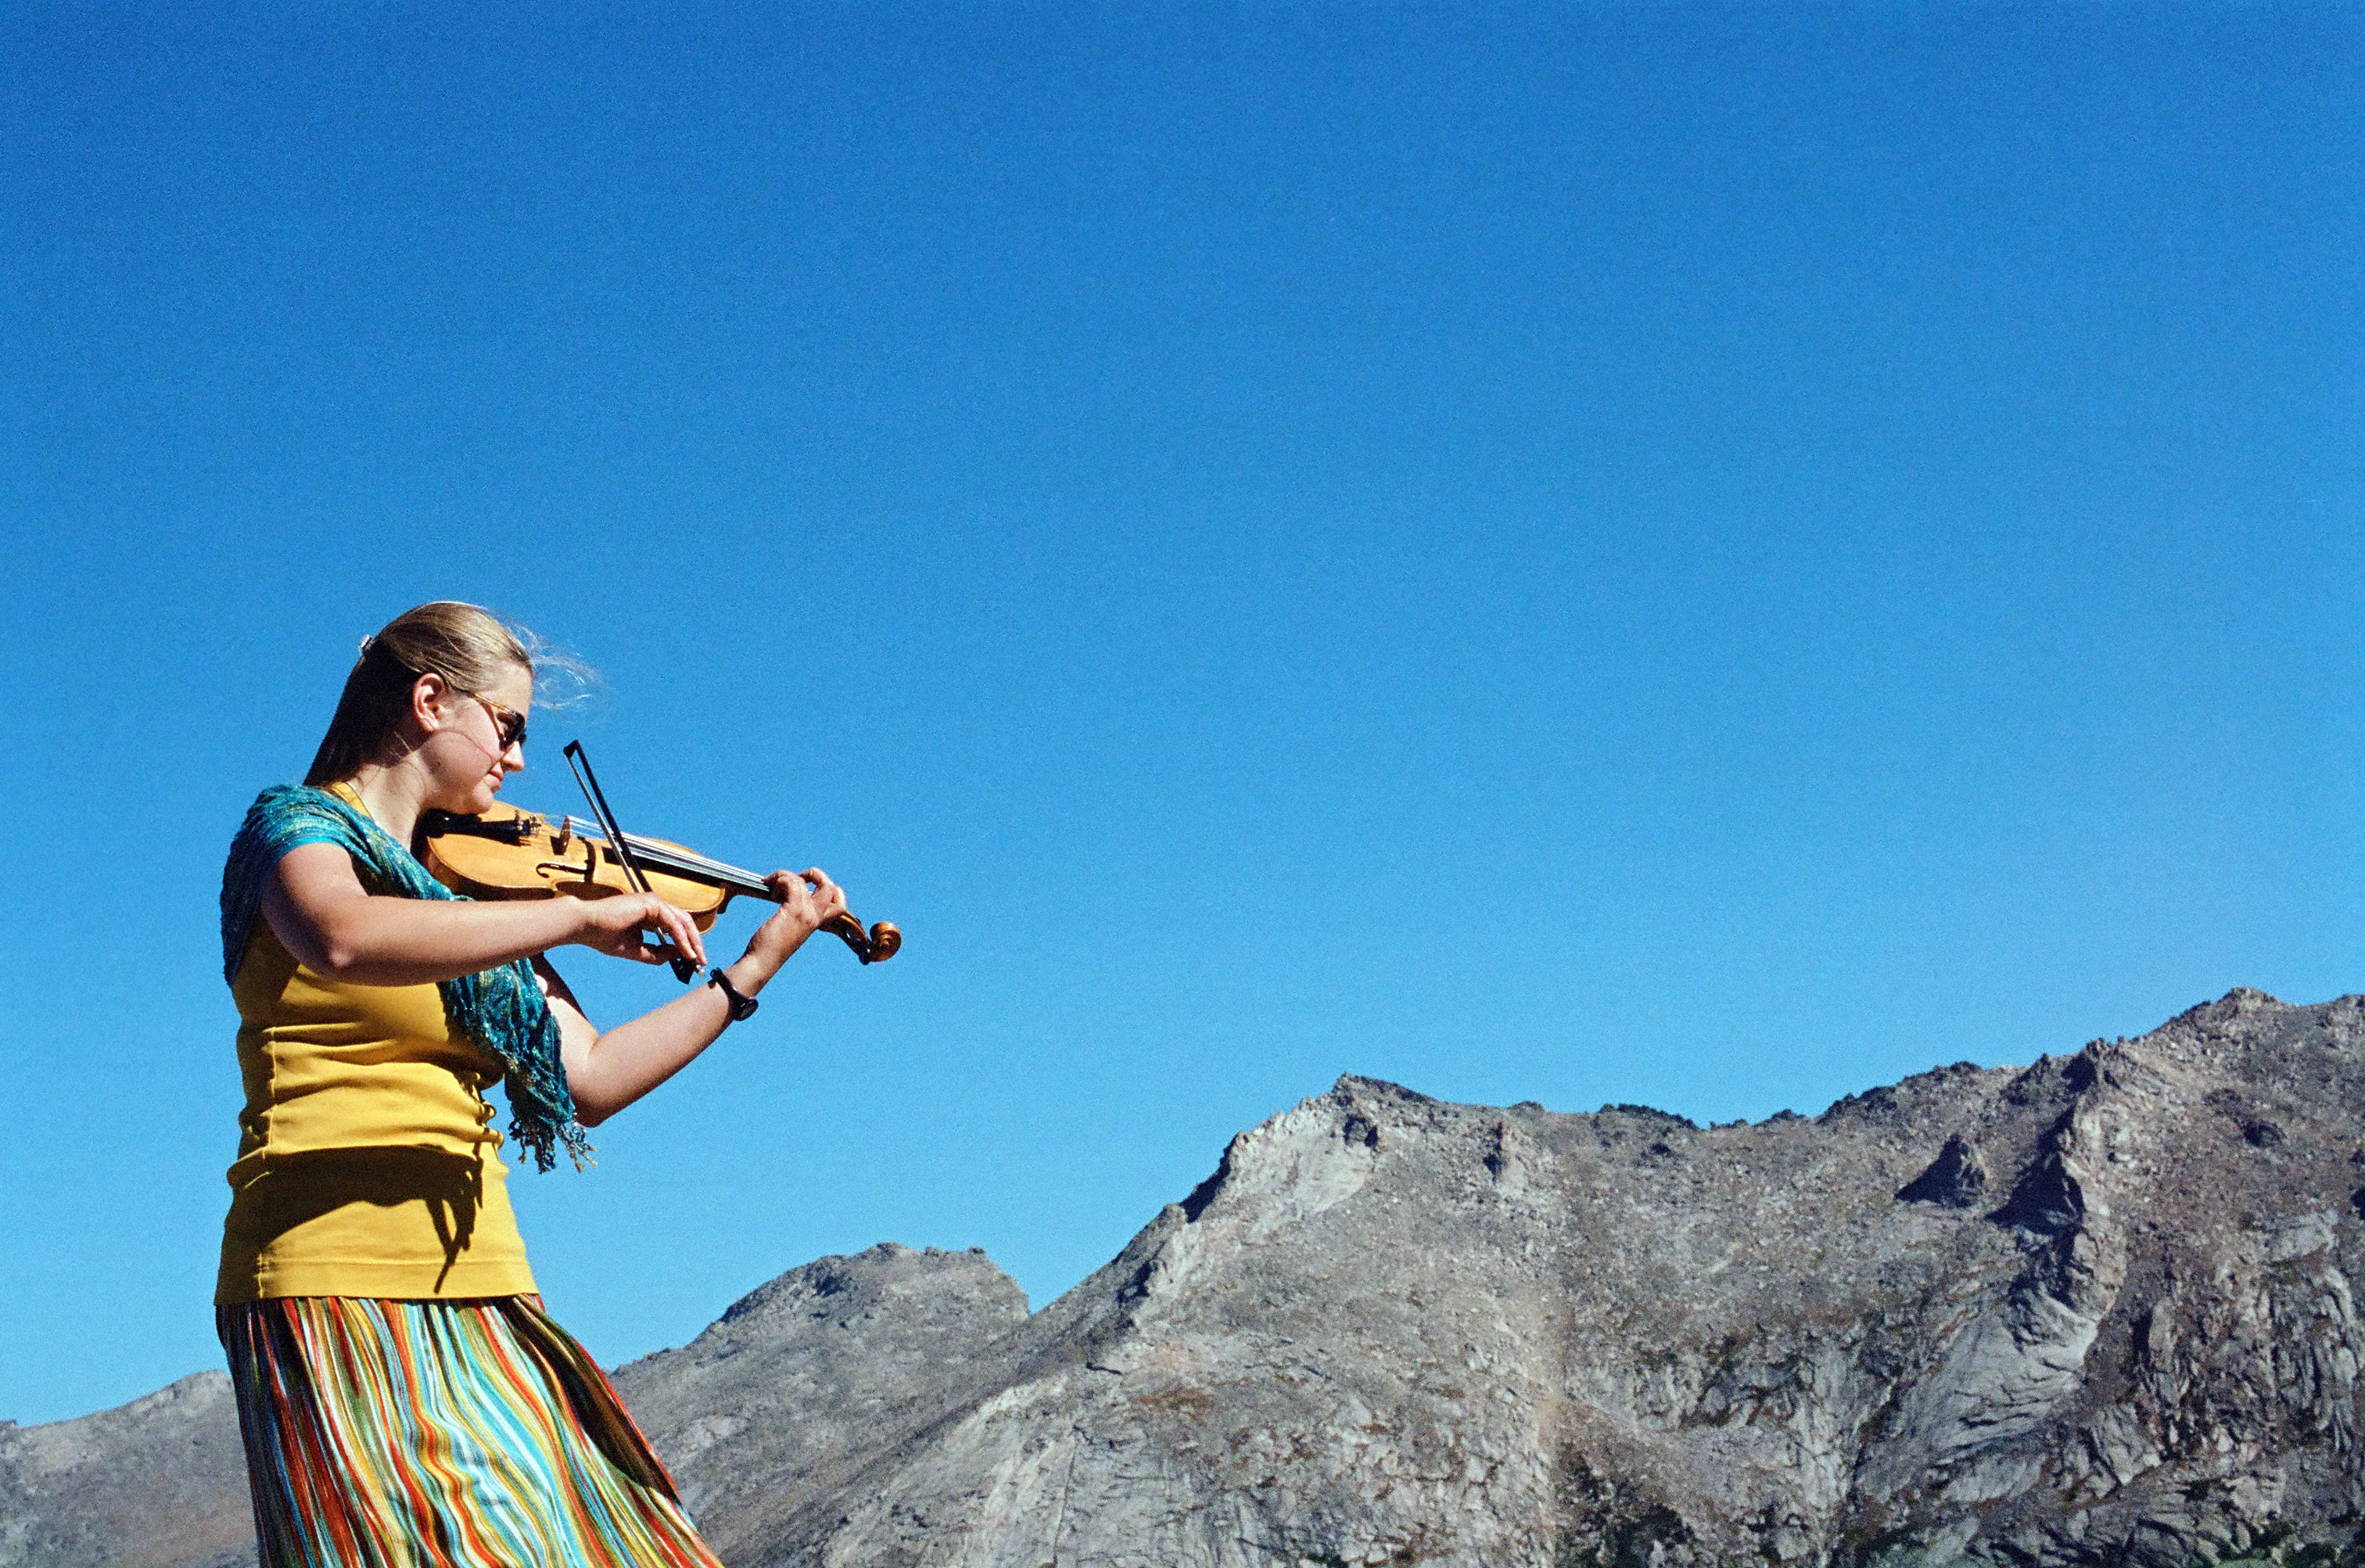 Wyoming Catholic College senior Margaret Serchen plays Bach on her violin atop a mountain in the Wind River range in Wyoming. Credit: Photo courtesy of Margaret Serchen